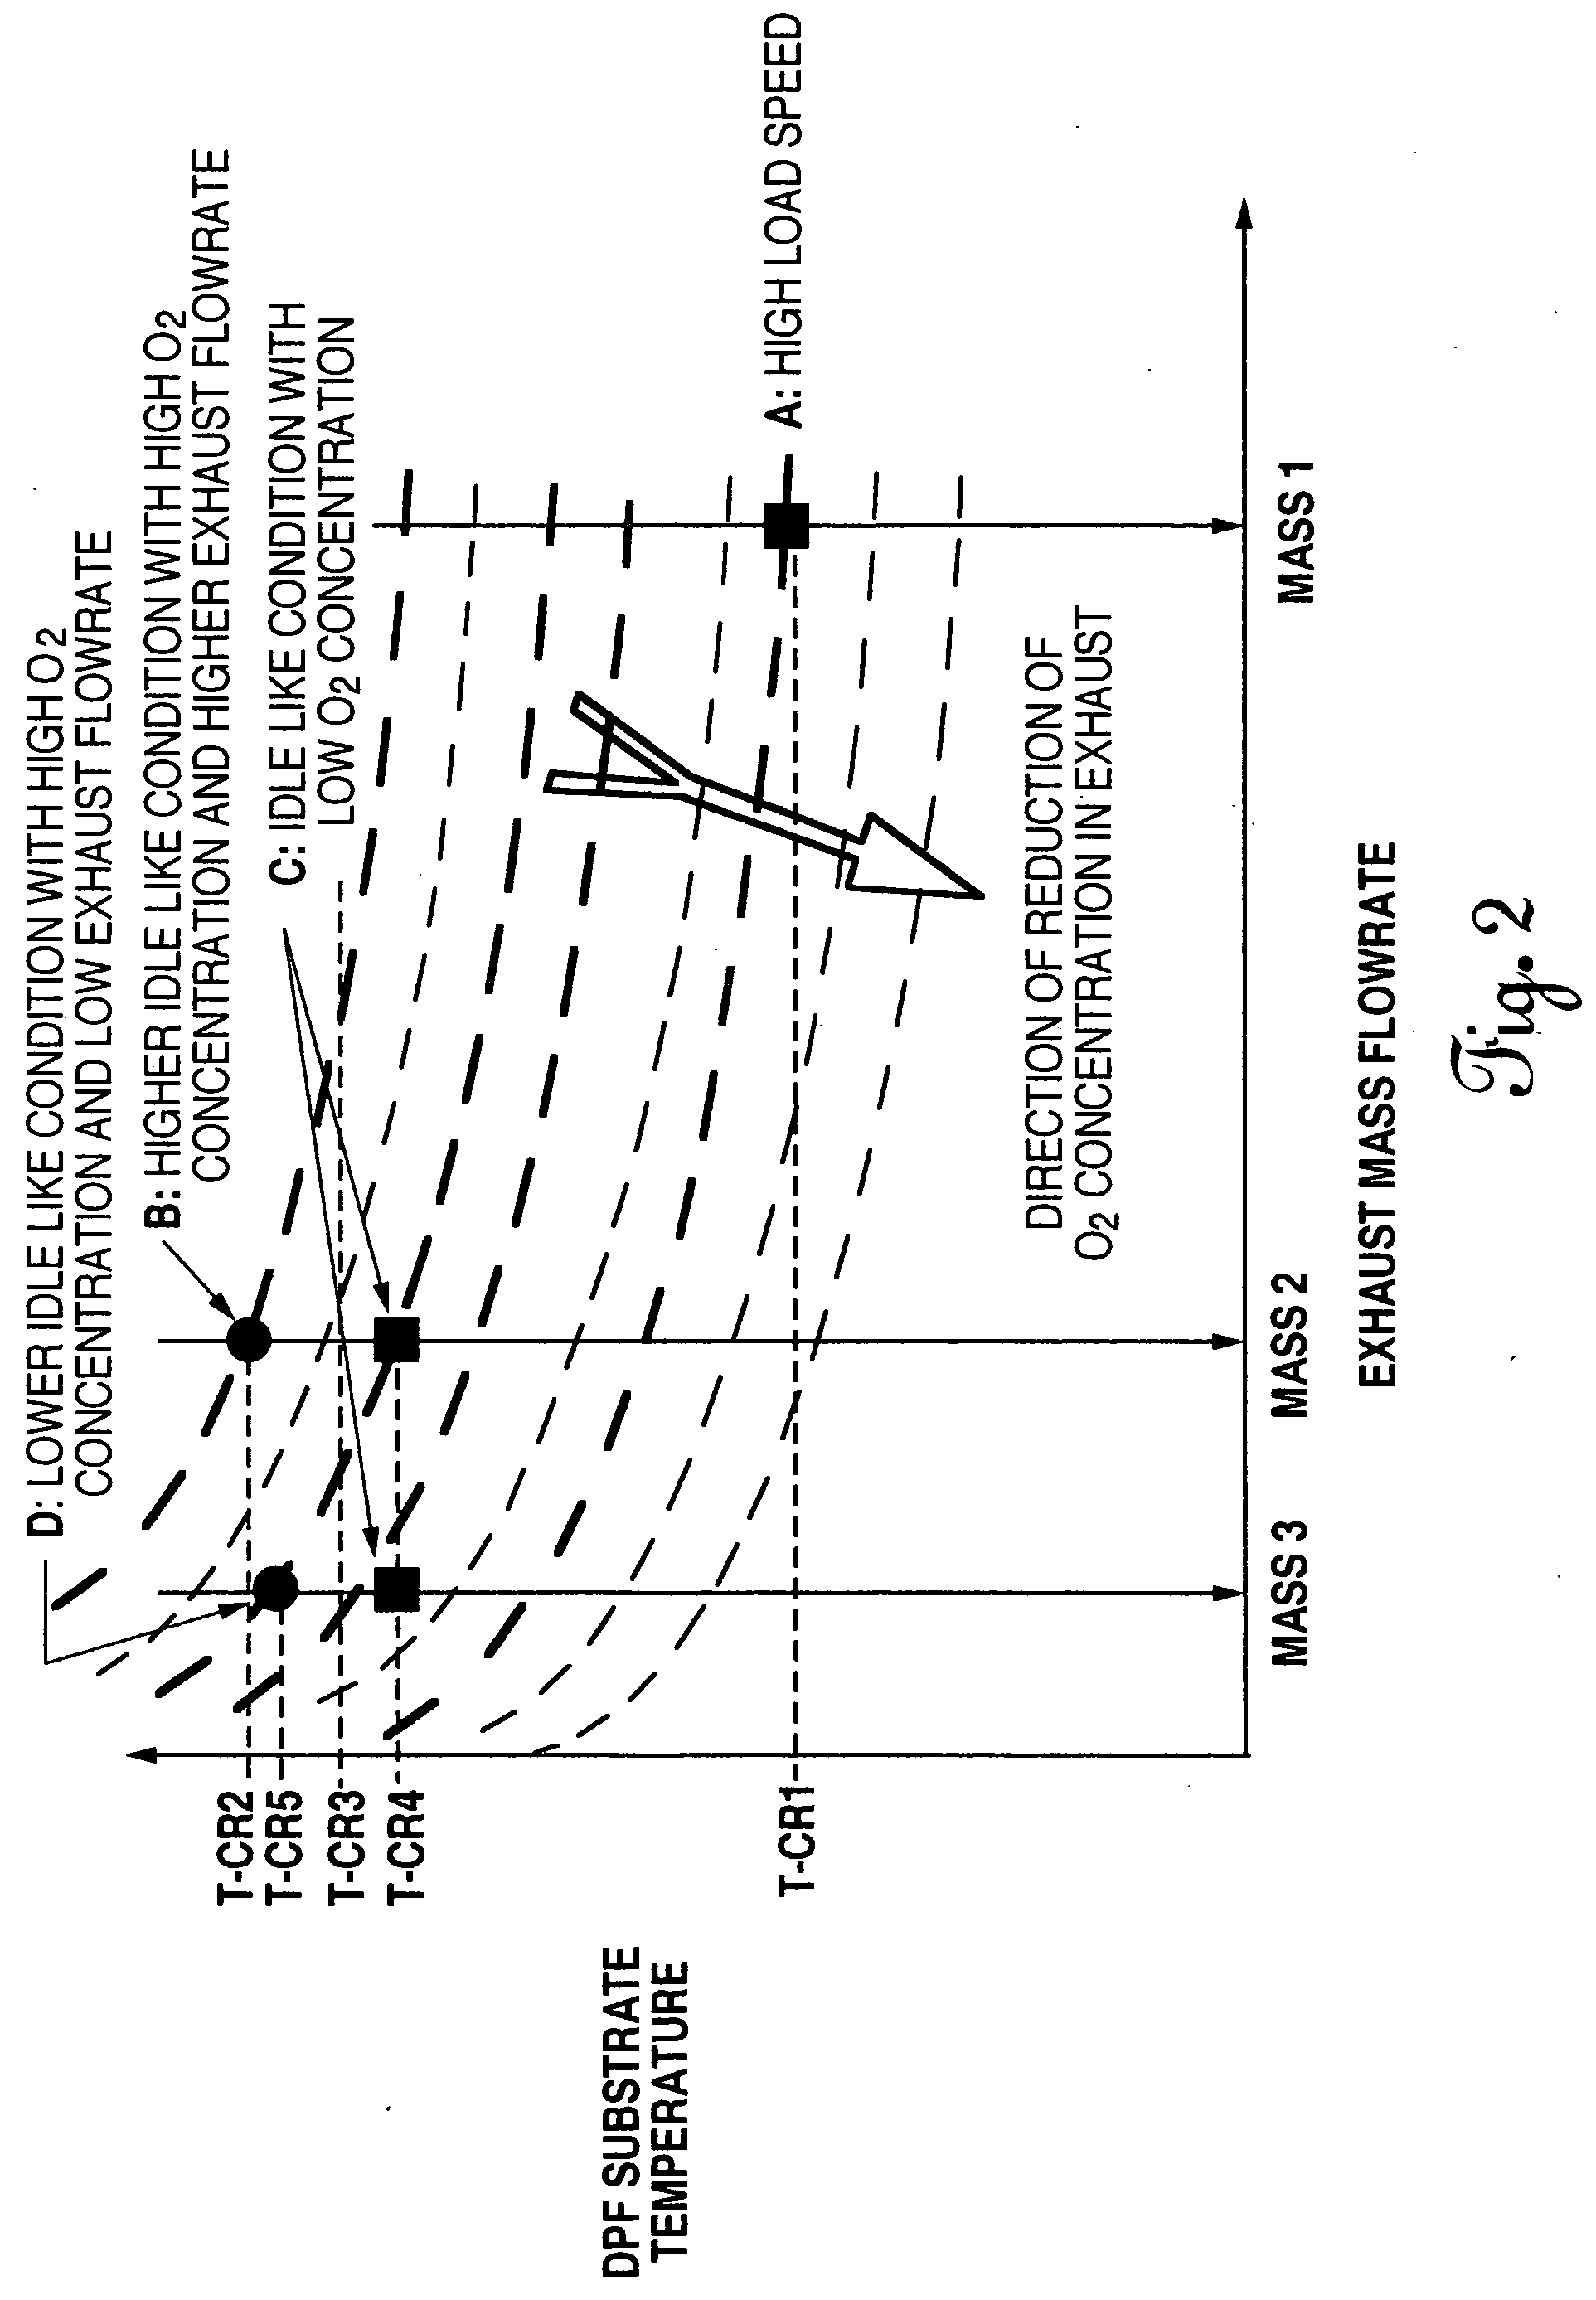 Method for controlling temperature in a diesel particulate filter during regeneration